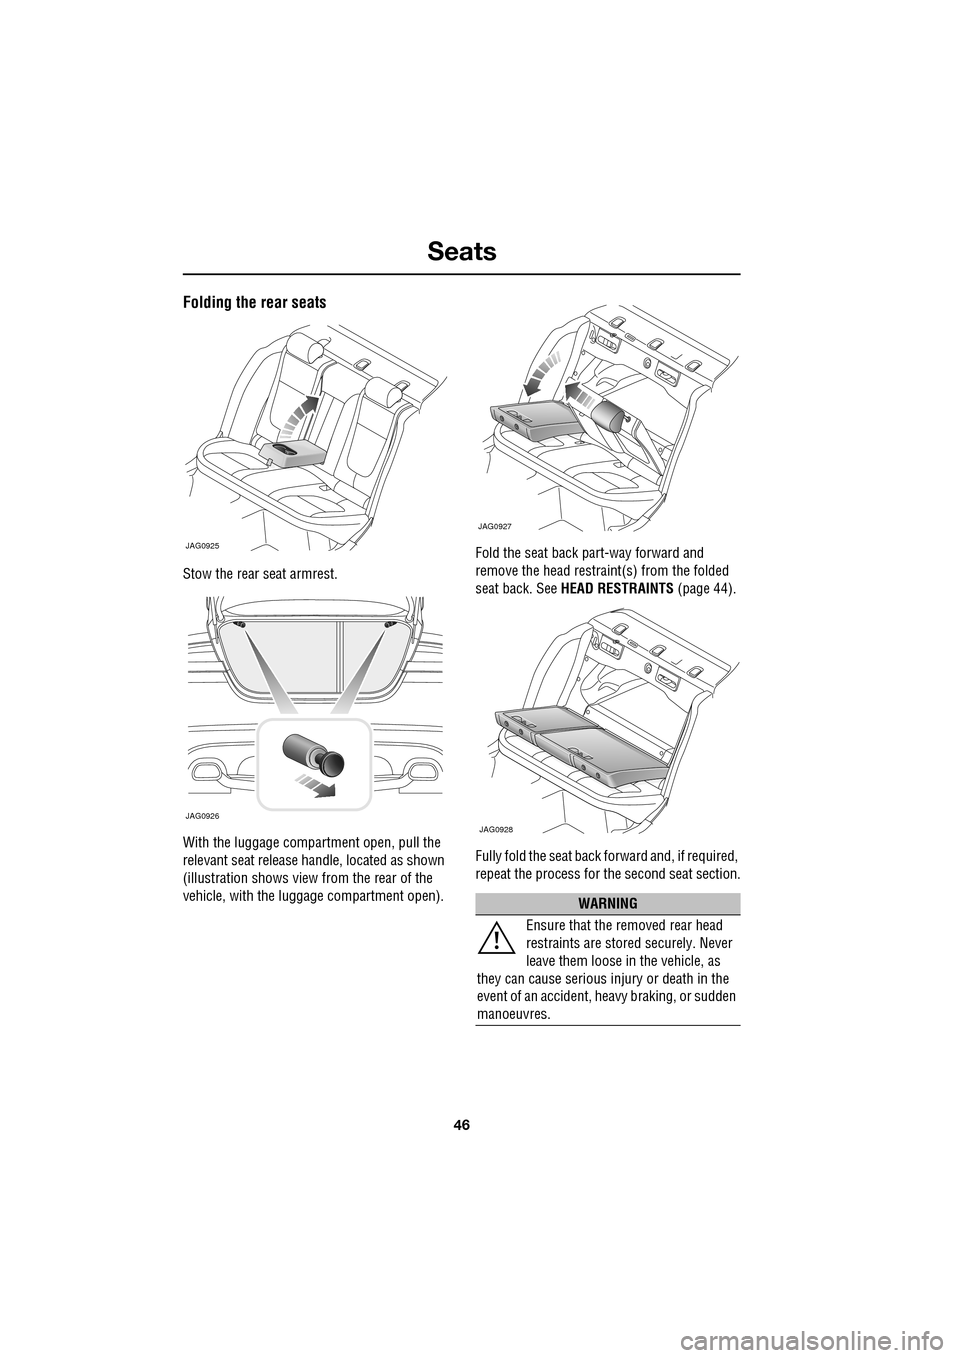 JAGUAR XF 2009 1.G Service Manual Seats
46
               
Folding the rear seats
Stow the rear seat armrest.
With the luggage compartment open, pull the 
relevant seat release handle, located as shown 
(illustration shows view from t